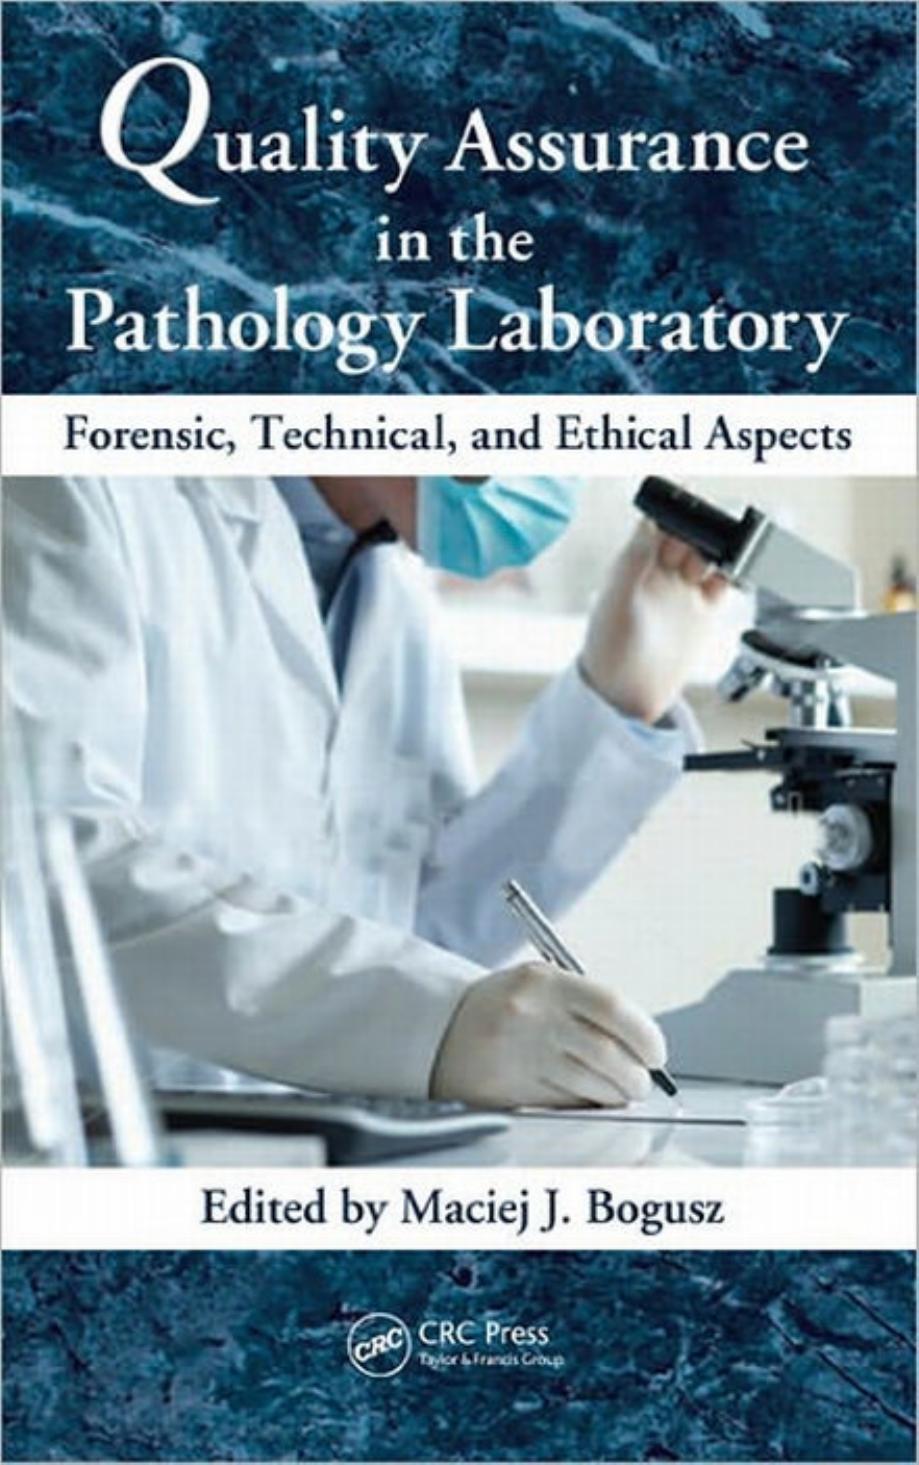 Quality Assurance in the Pathology Laboratory Forensic, Technical, and Ethical Aspects